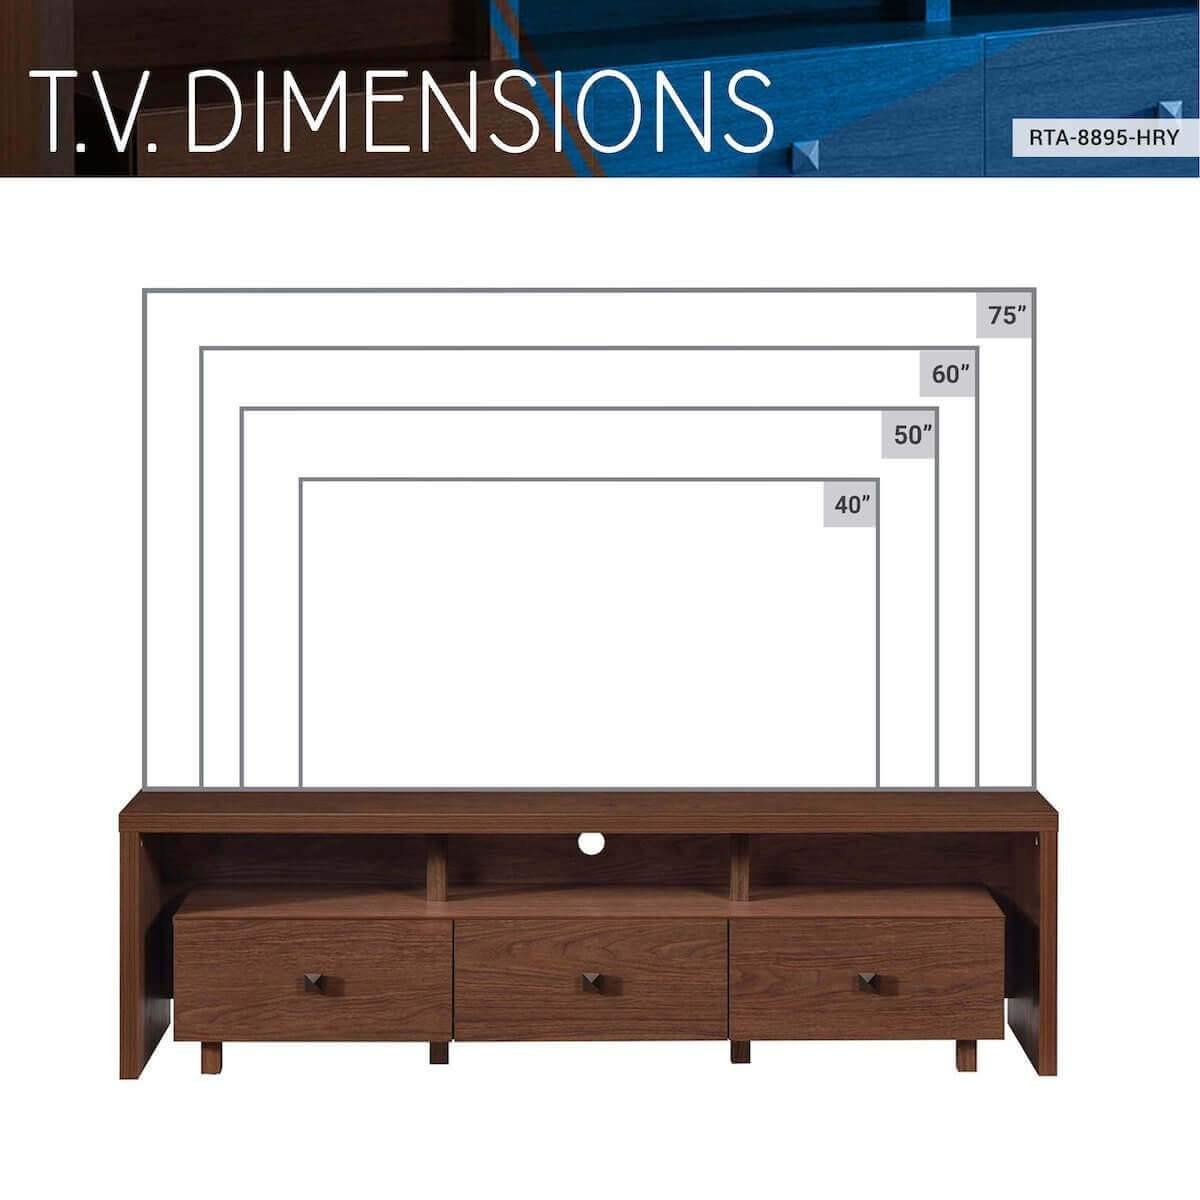 Techni Mobili Hickory Elegant TV Stand for TV's Up To 75" with Storage RTA-8895-HRY TV Dimensions